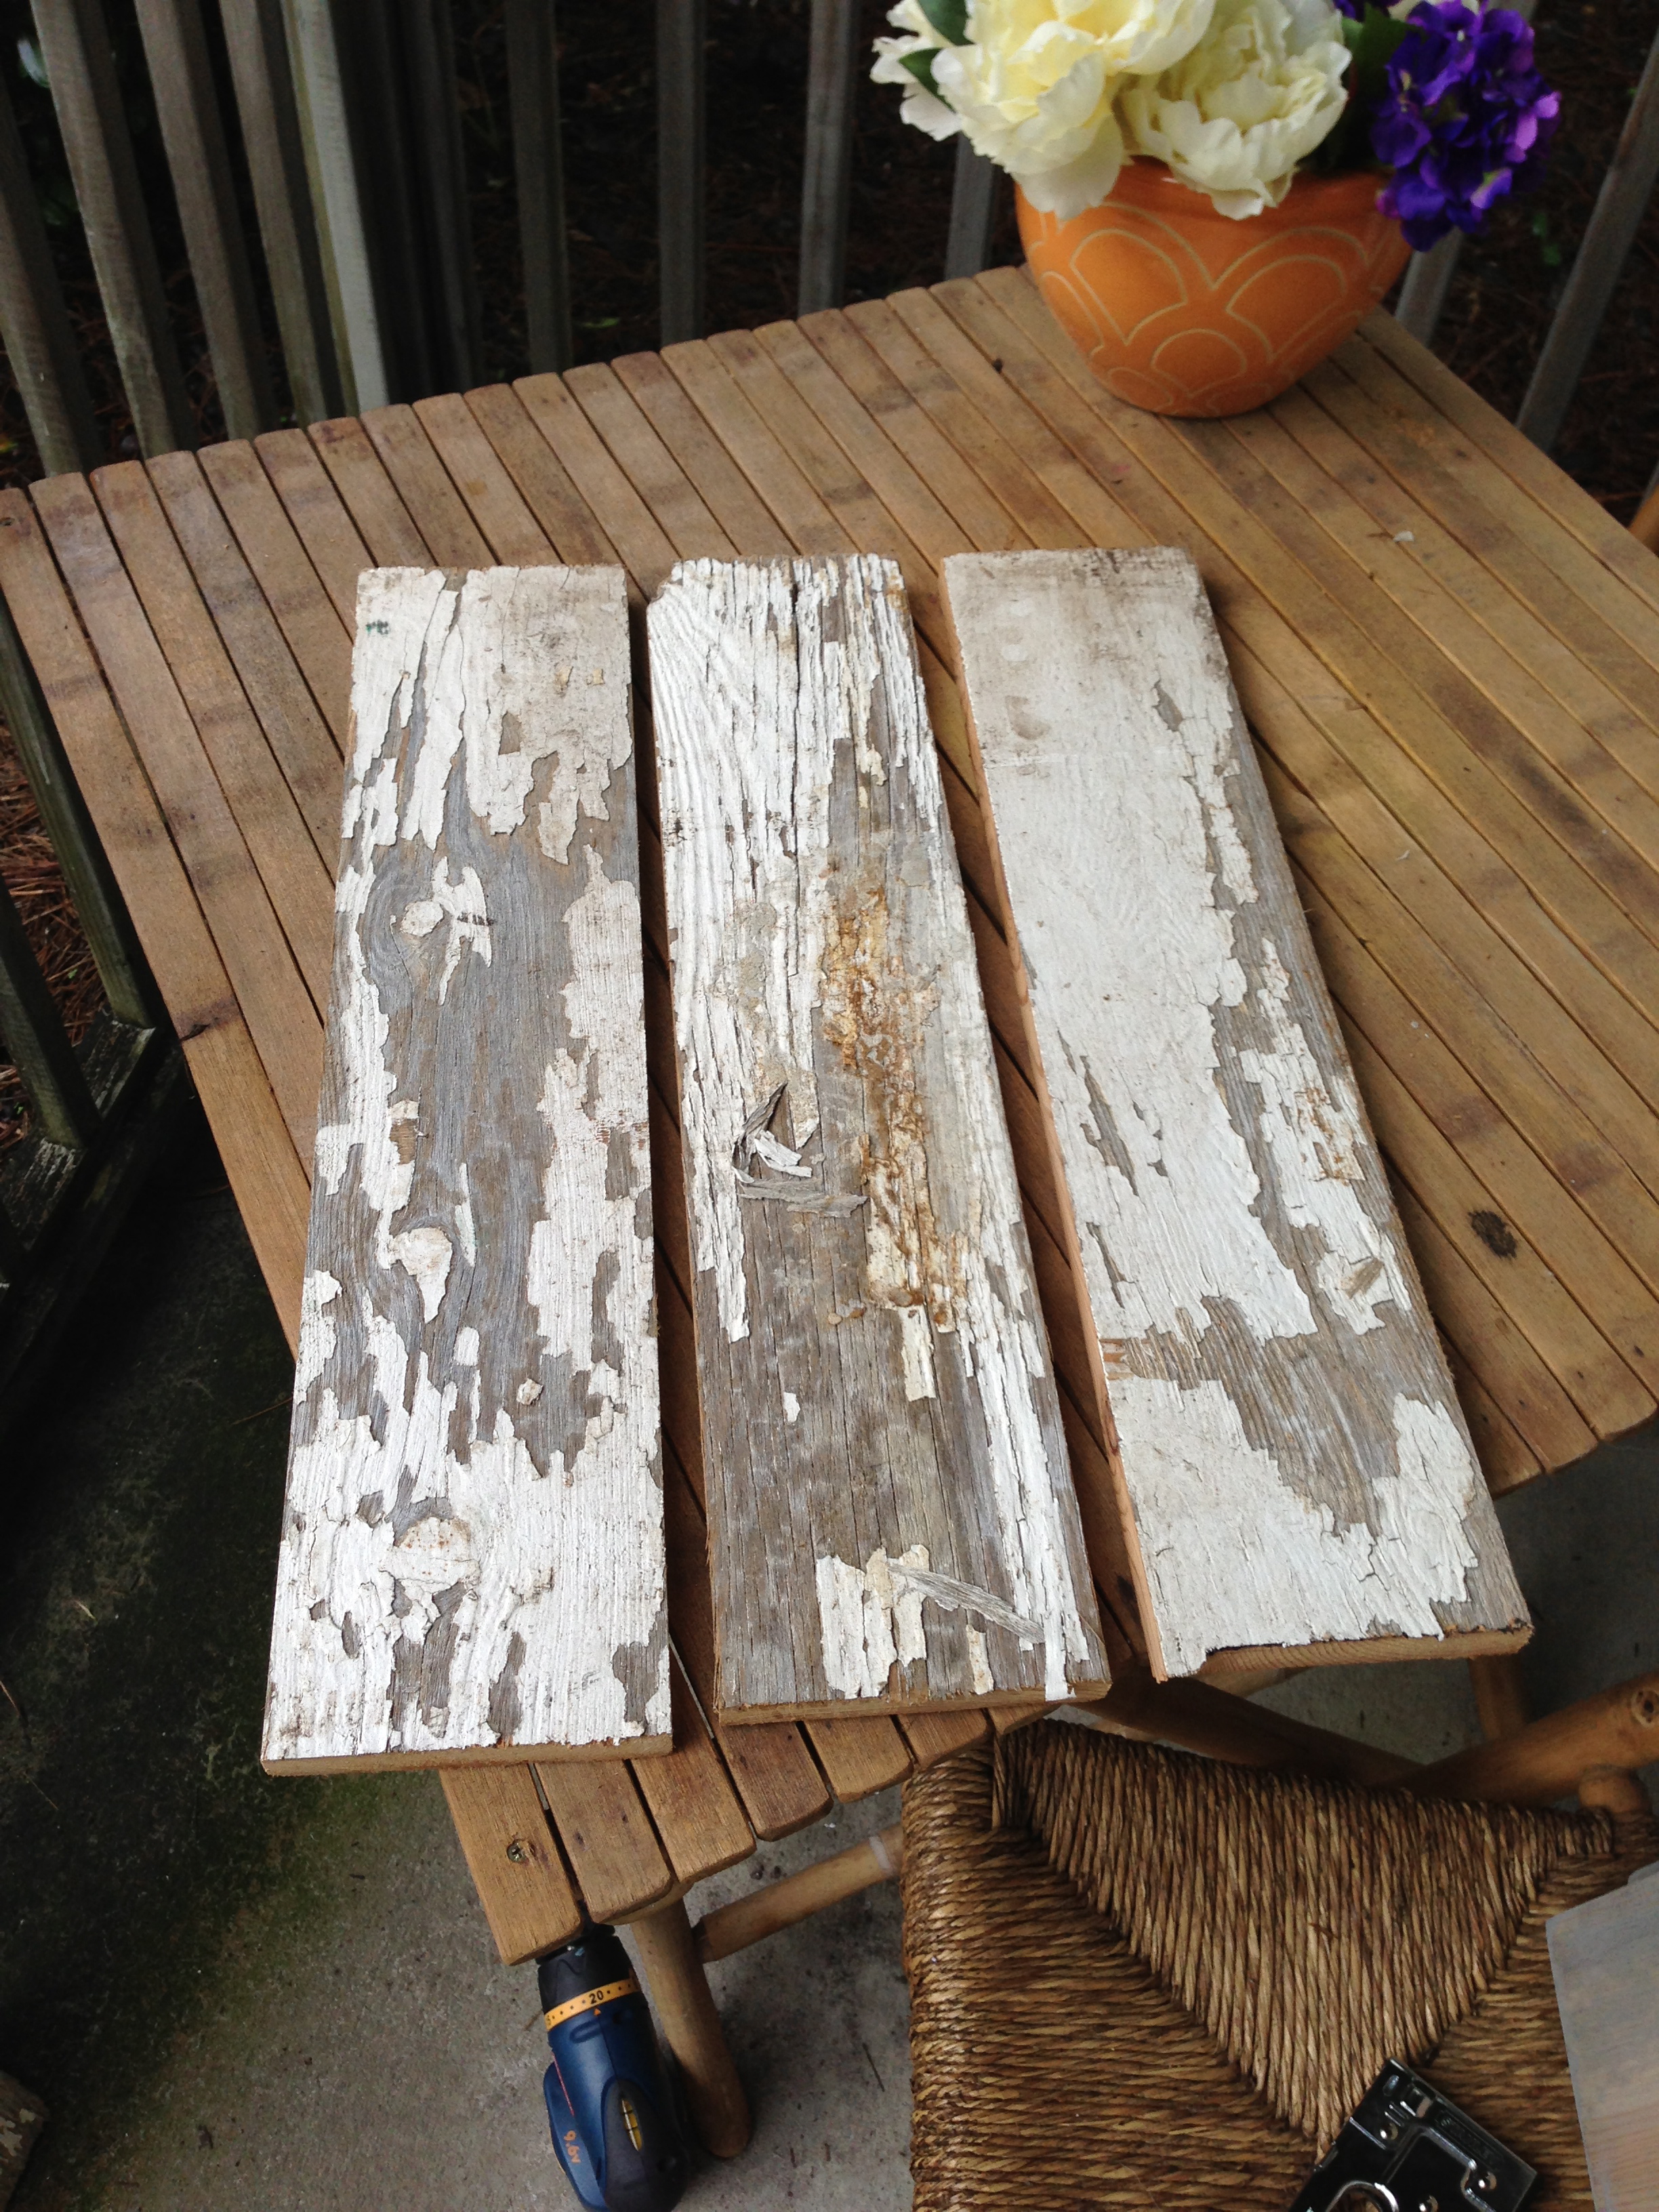 How to Make Wood Look Rustic